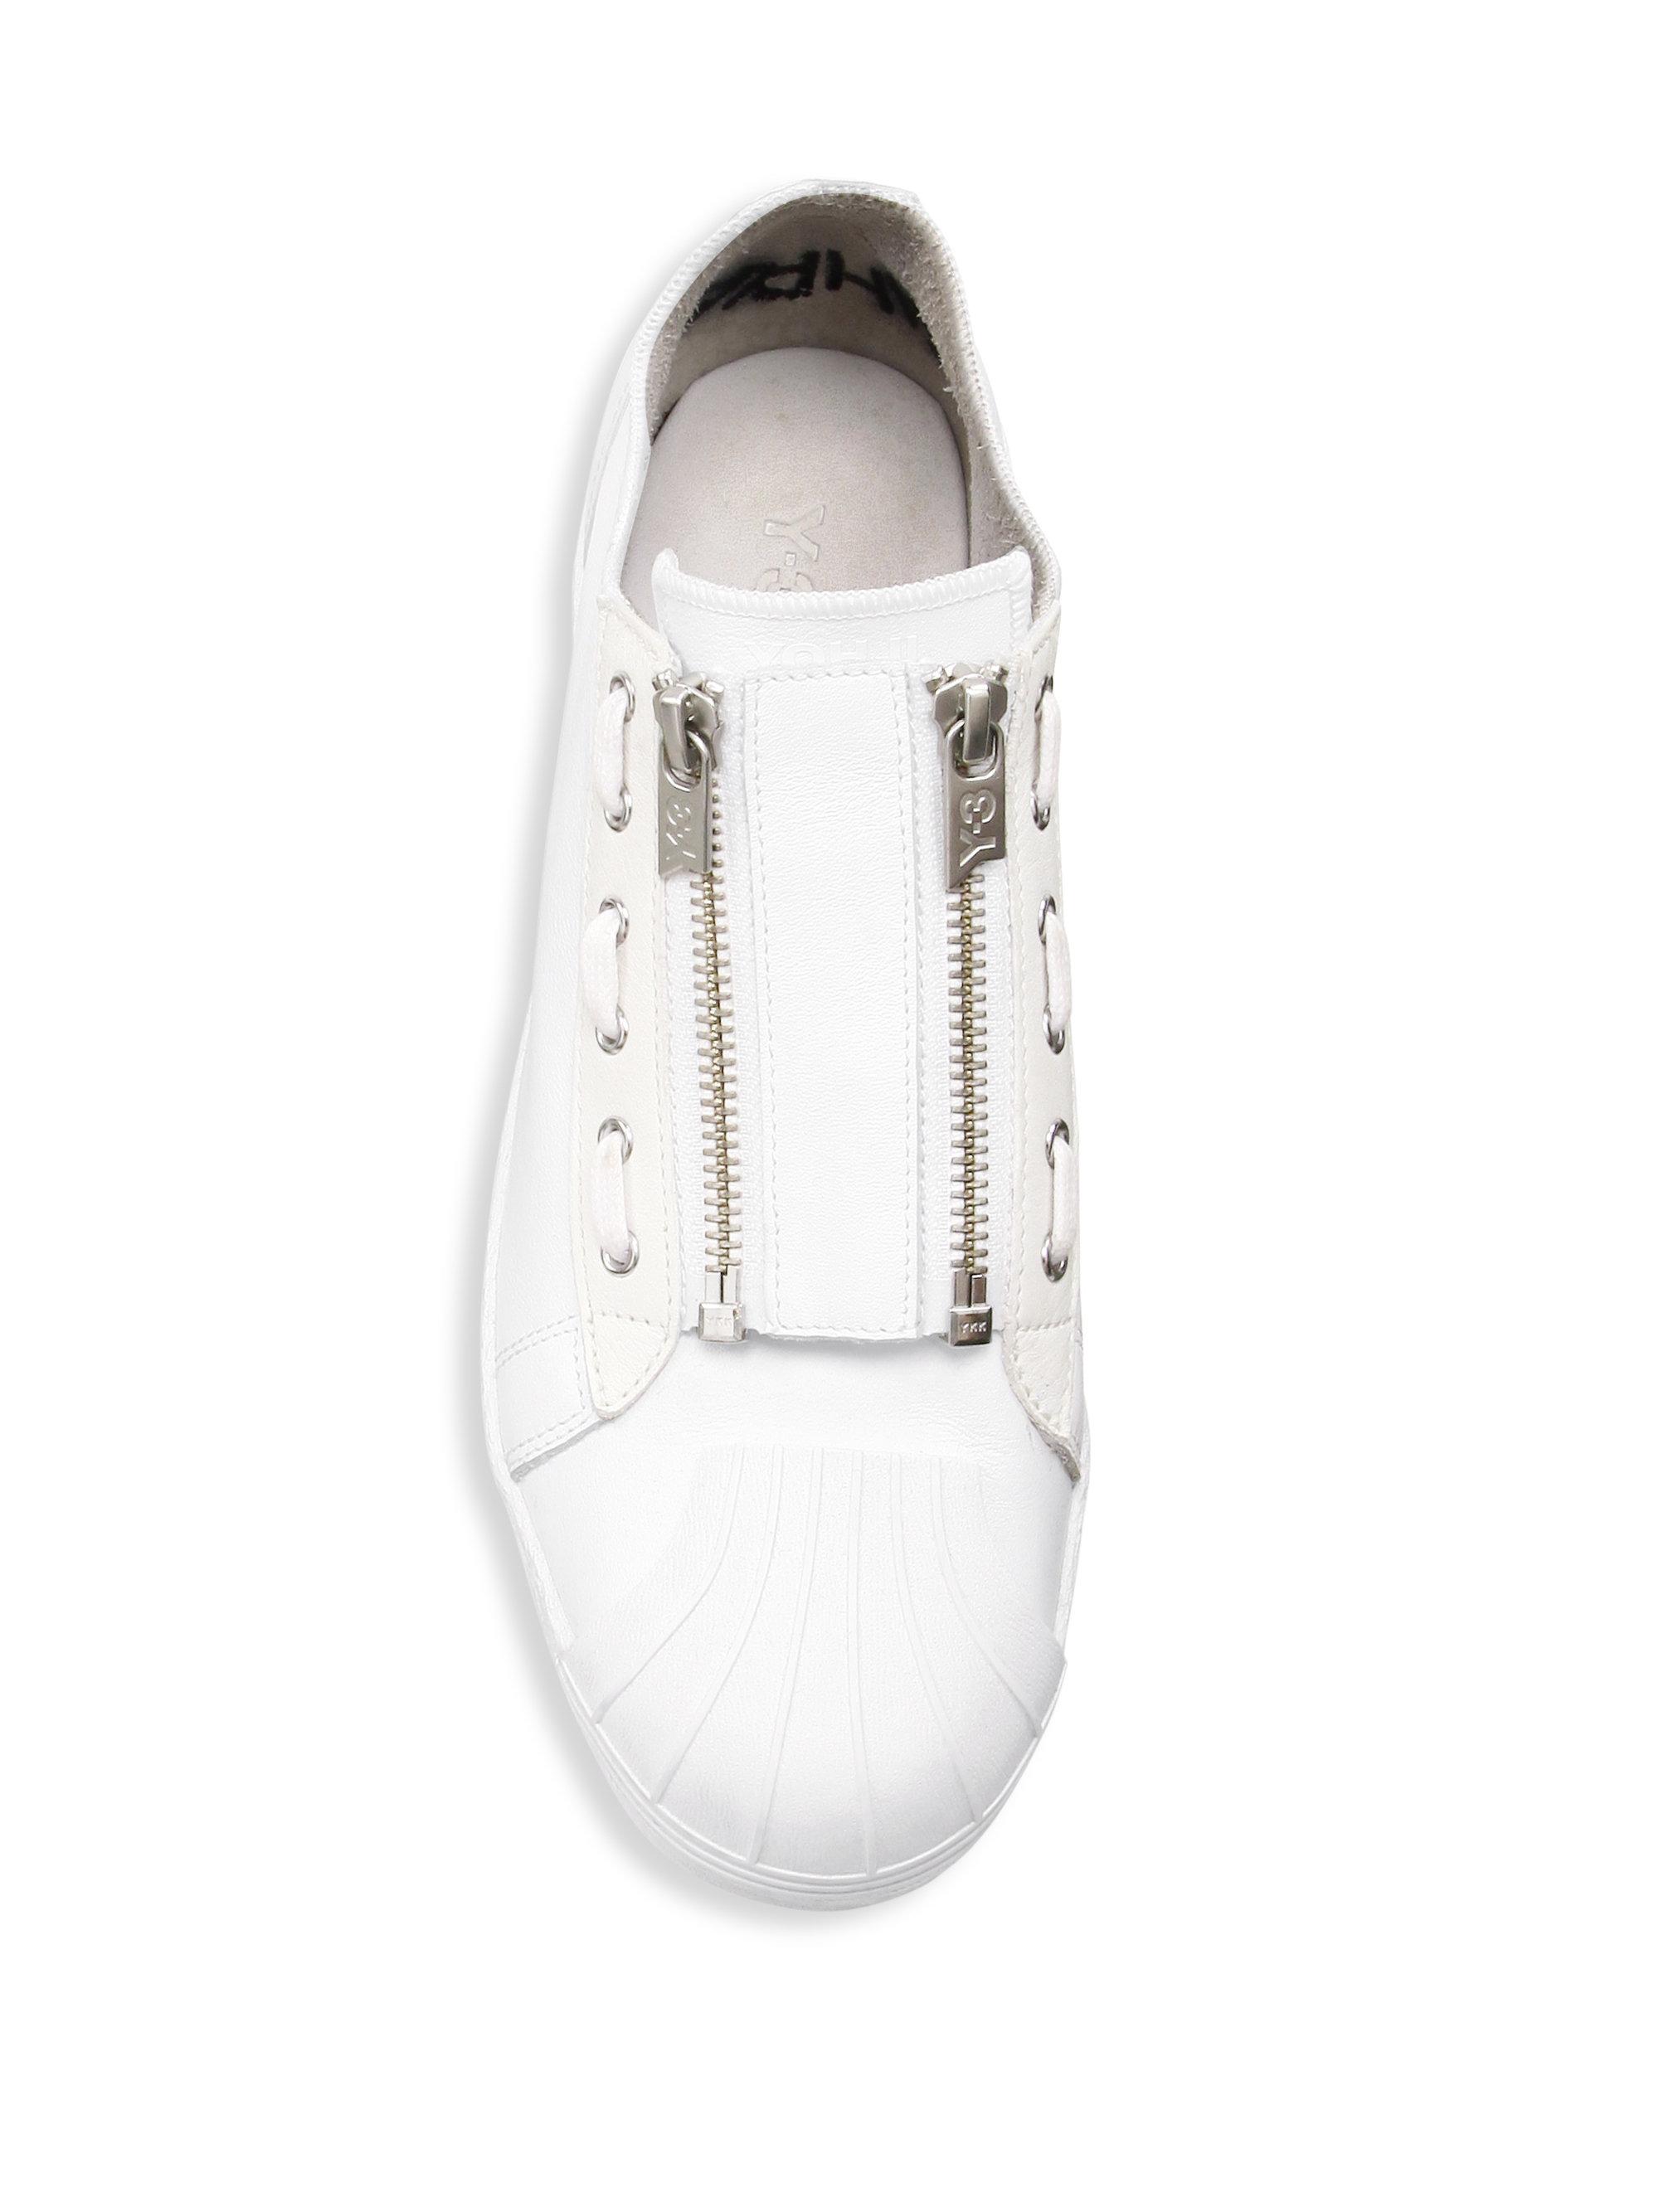 Y-3 Super Zip Leather Sneakers in White for Men - Lyst